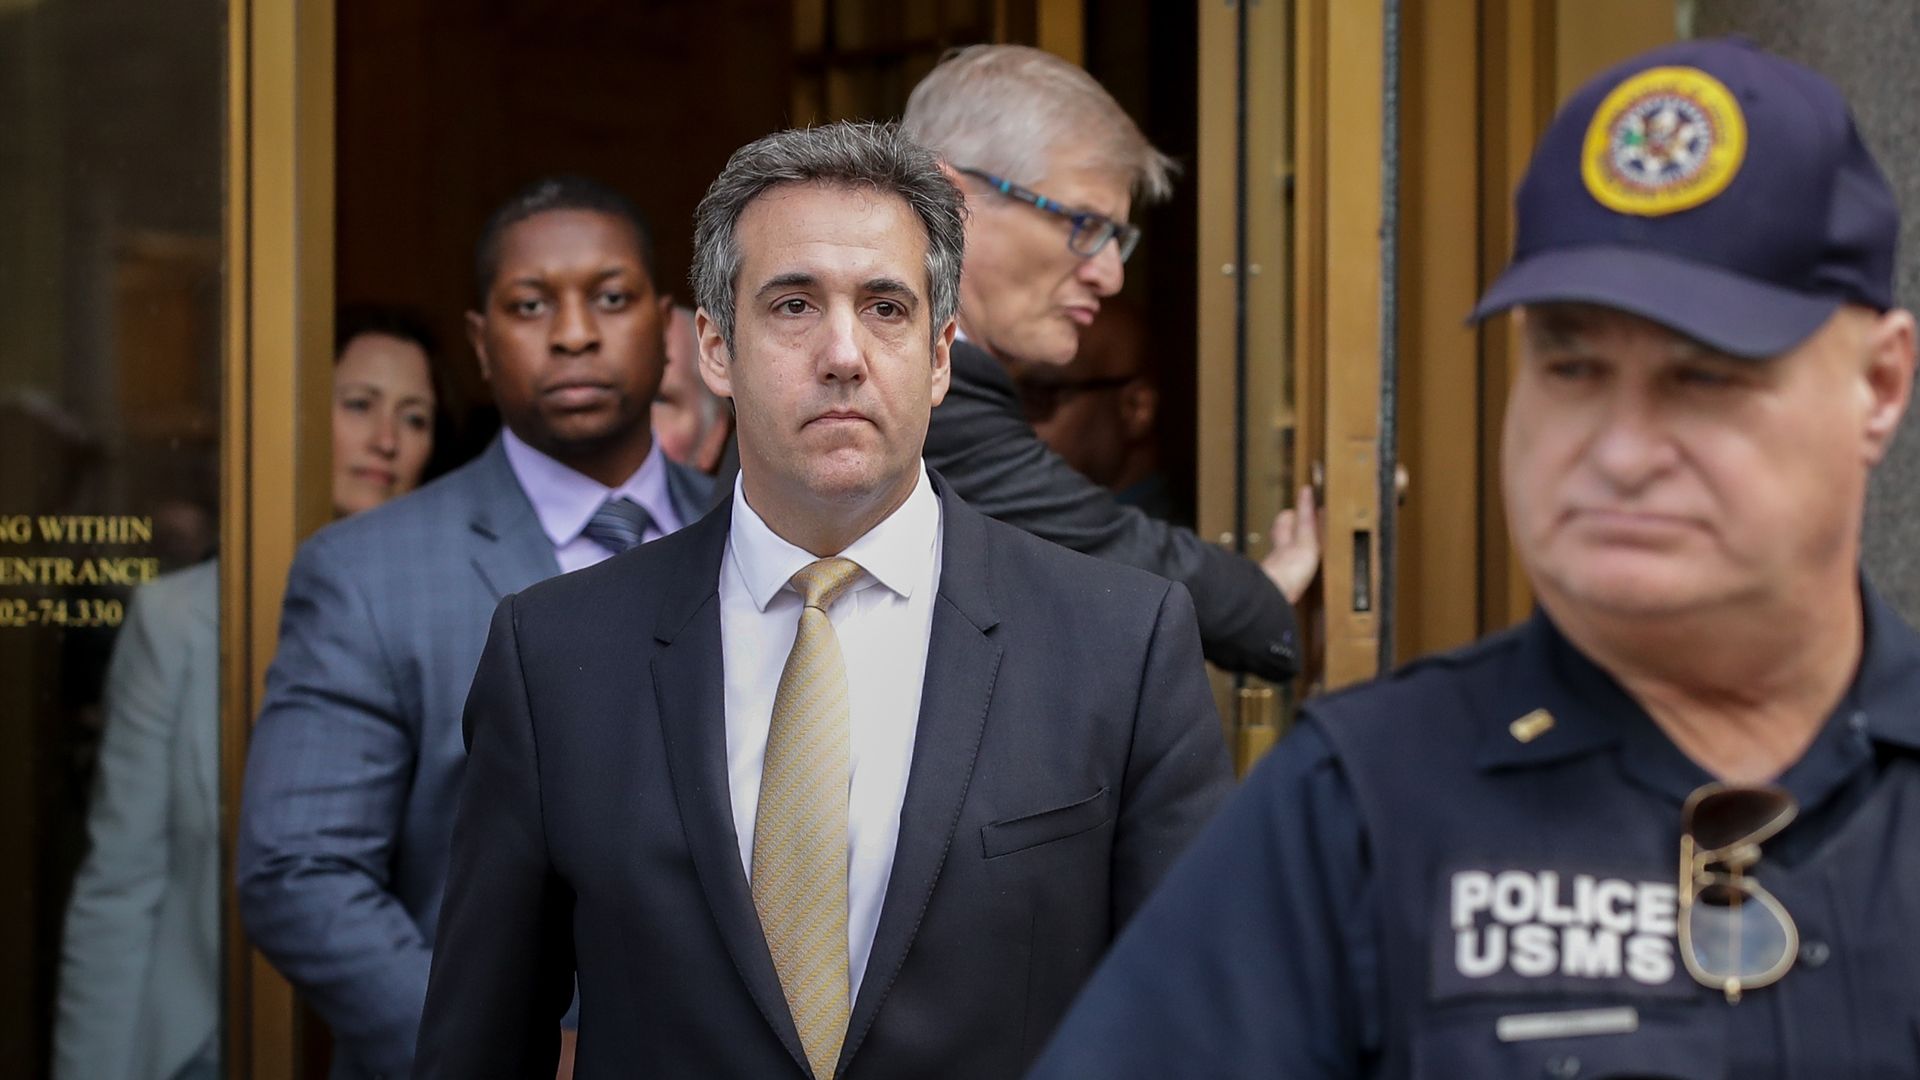 Michael Cohen leaves a courthouse in New York